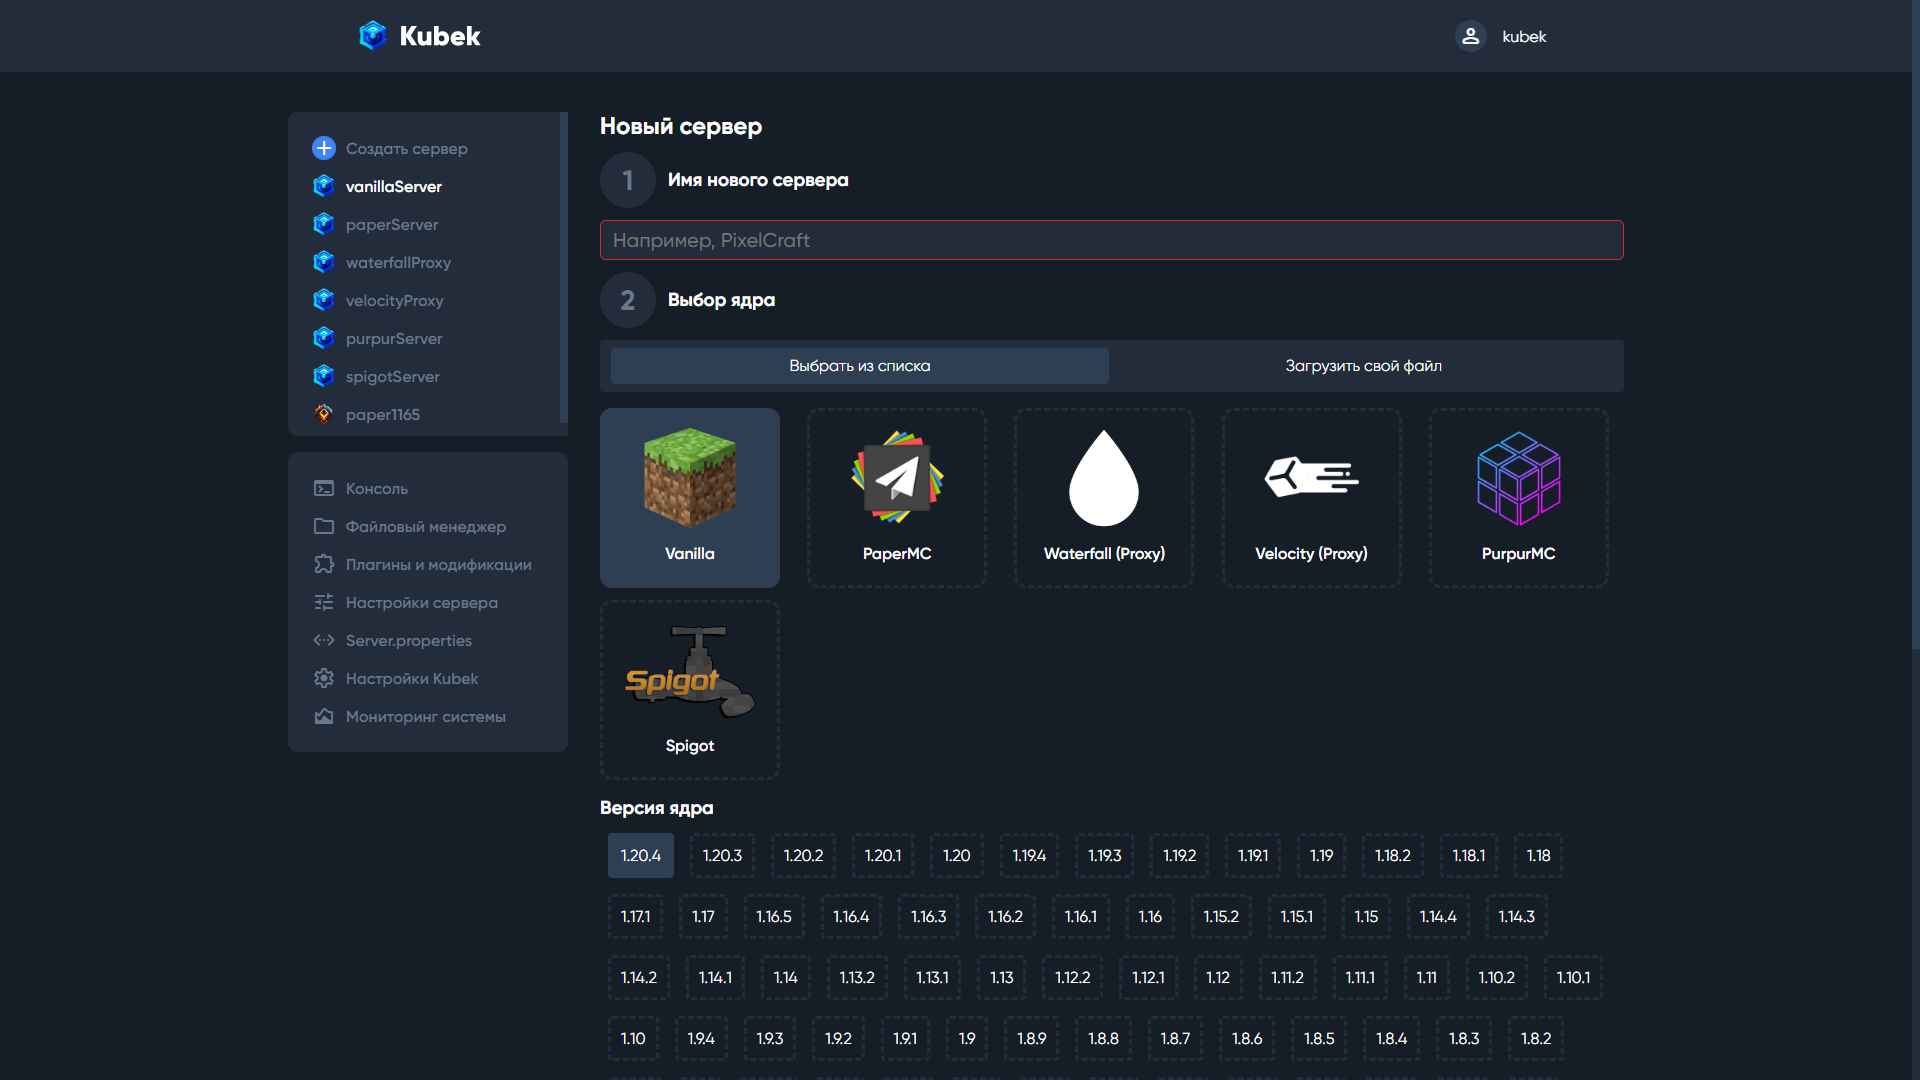 New server page